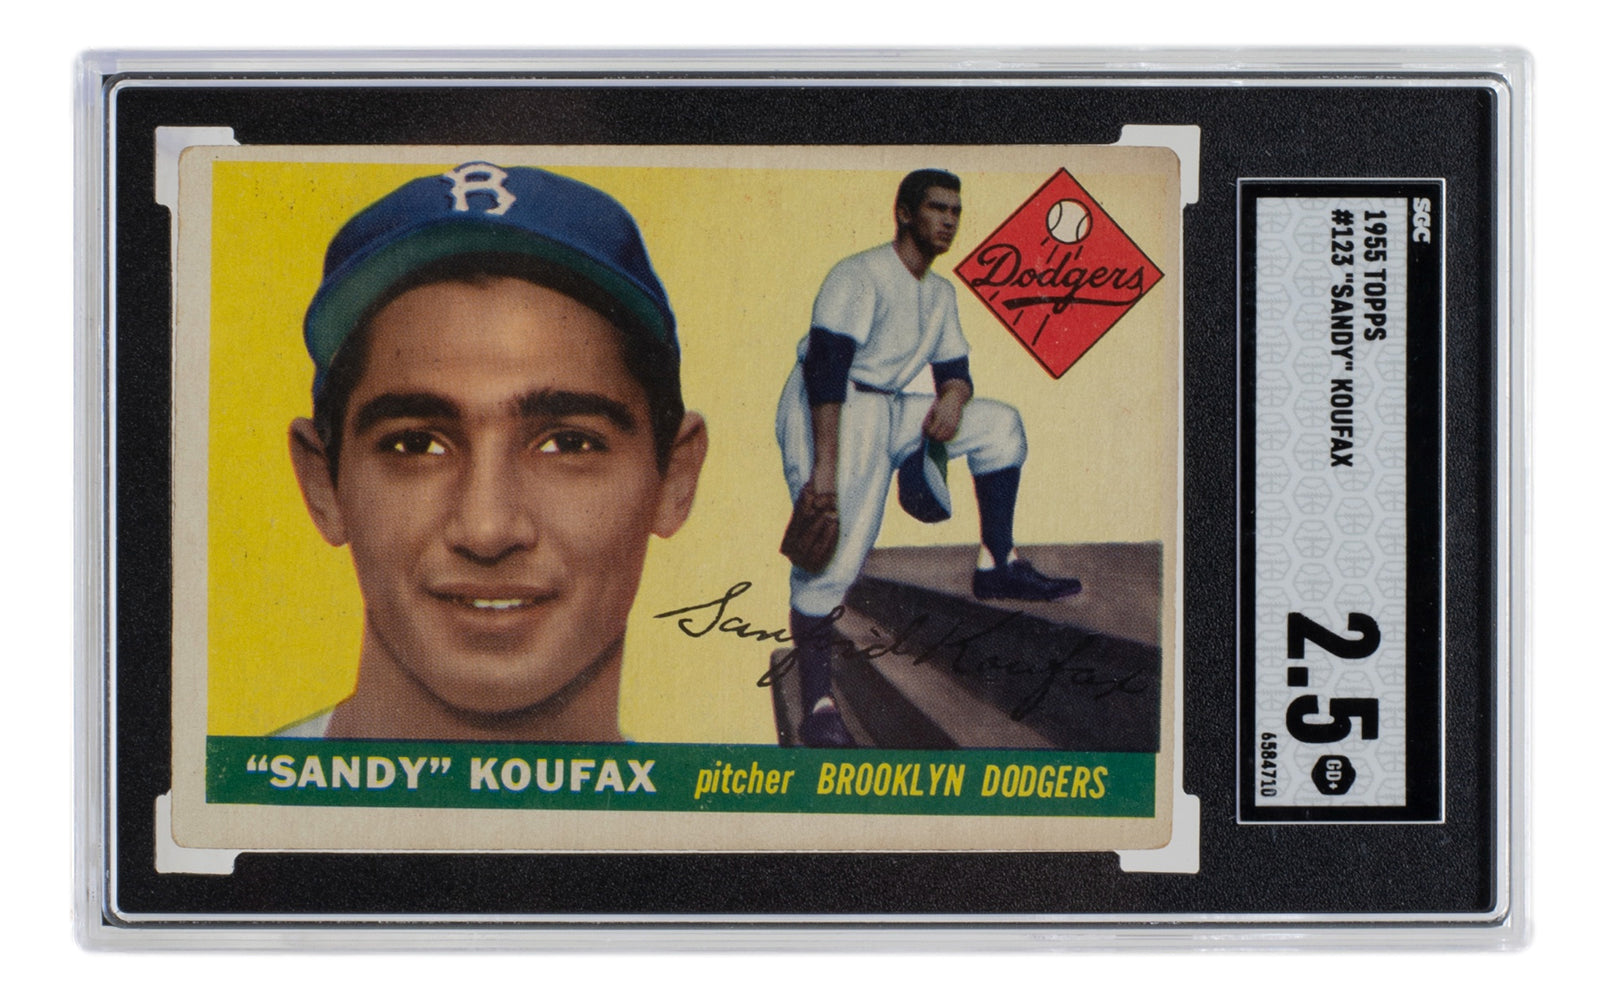 Topps Topps Project 2020 Card 89 - 1955 Sandy Koufax By Naturel